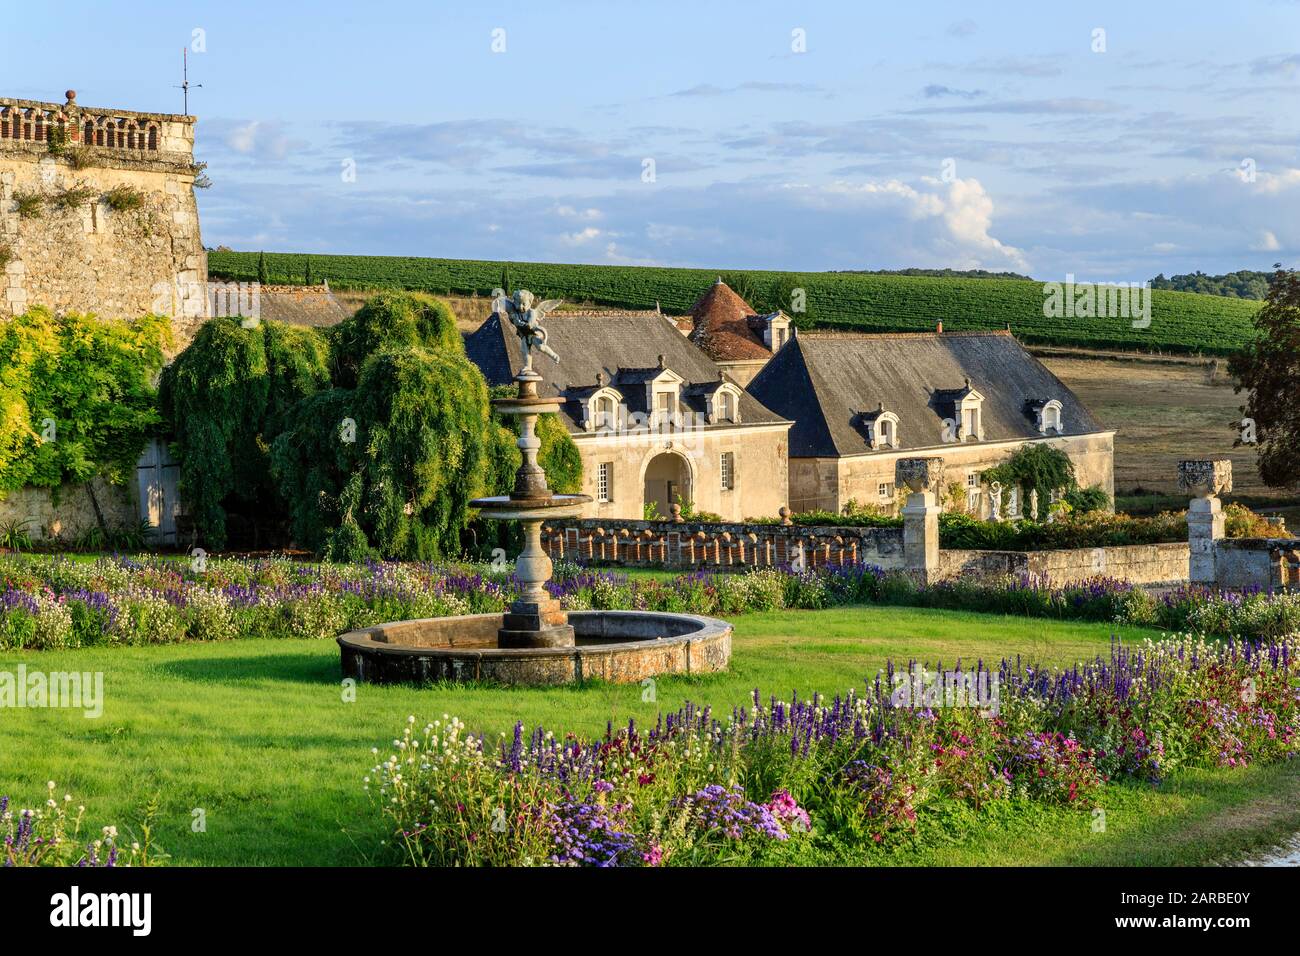 Page 2 - La Fran High Resolution Stock Photography and Images - Alamy